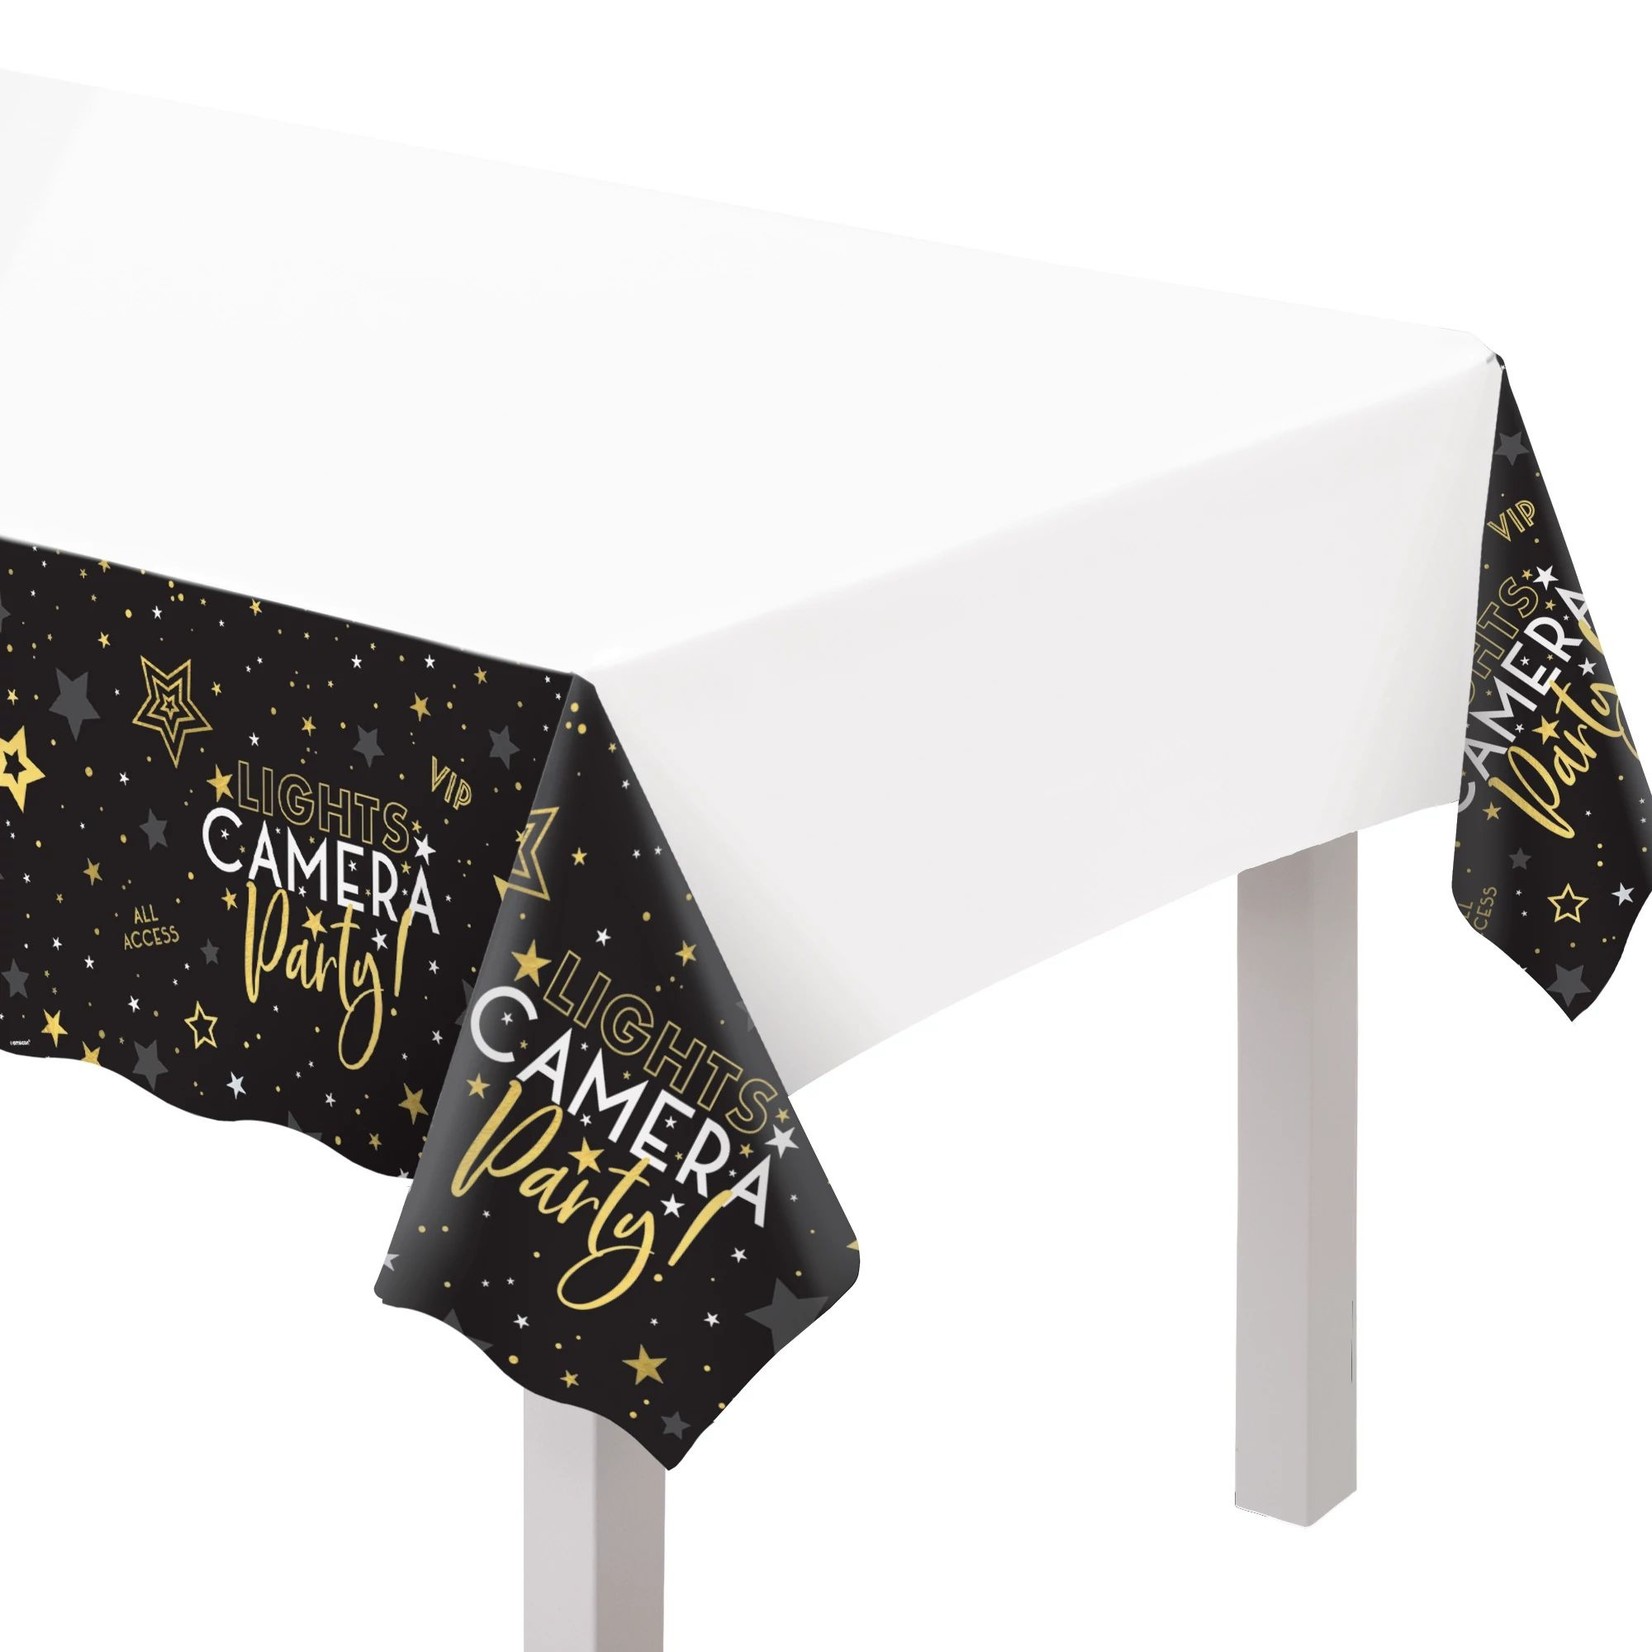 Awards Night Plastic Table Cover - 54"X102"